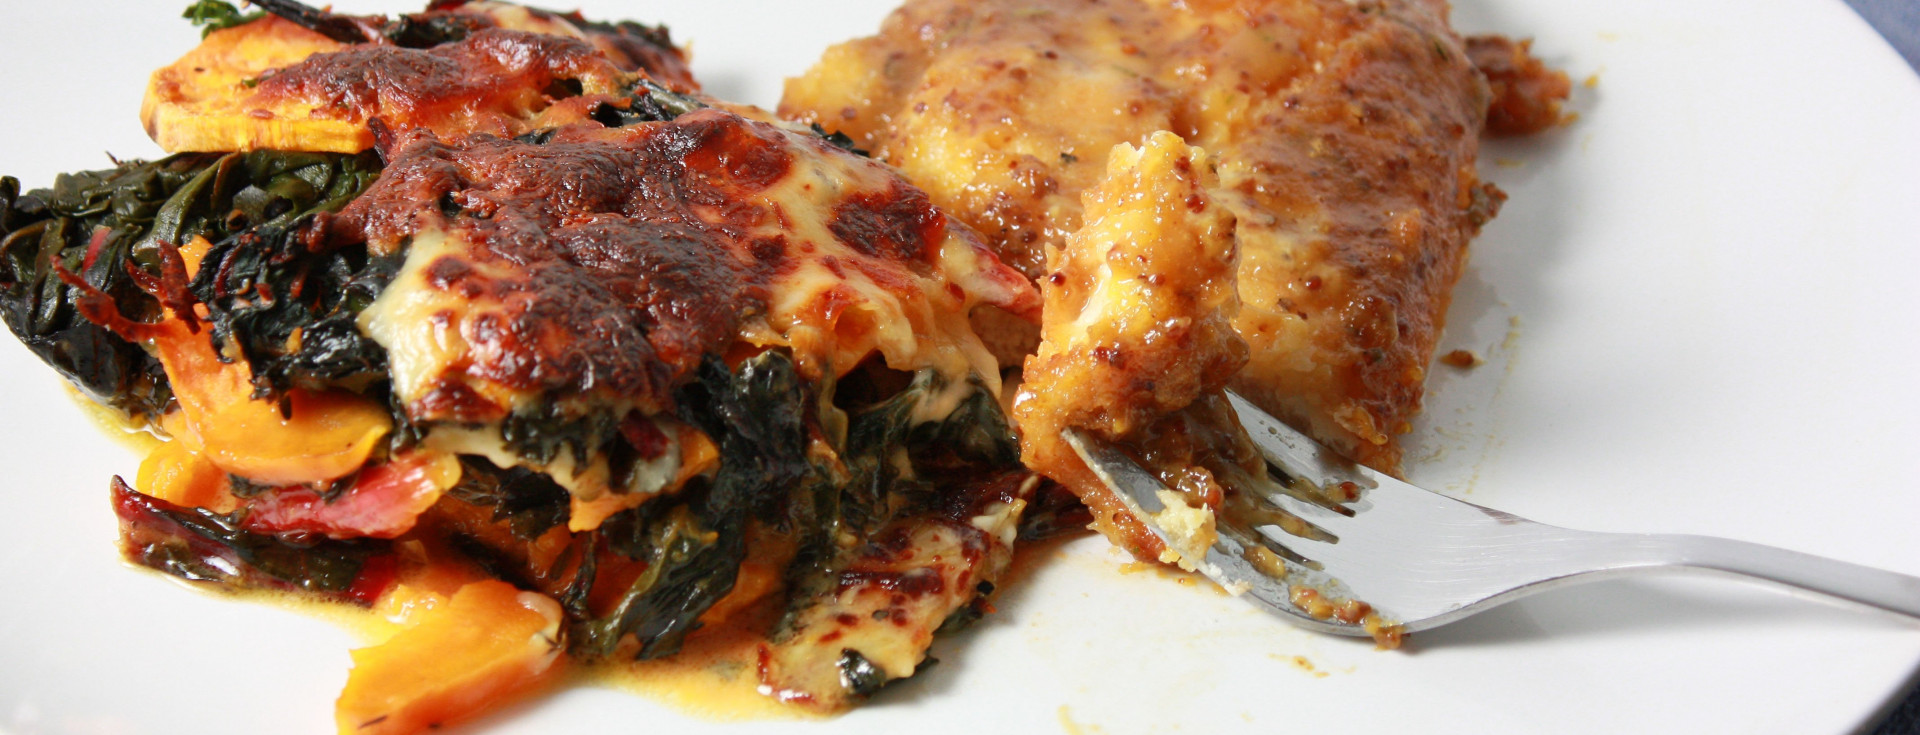 Pan fried chicken with easy greens and potato gratin